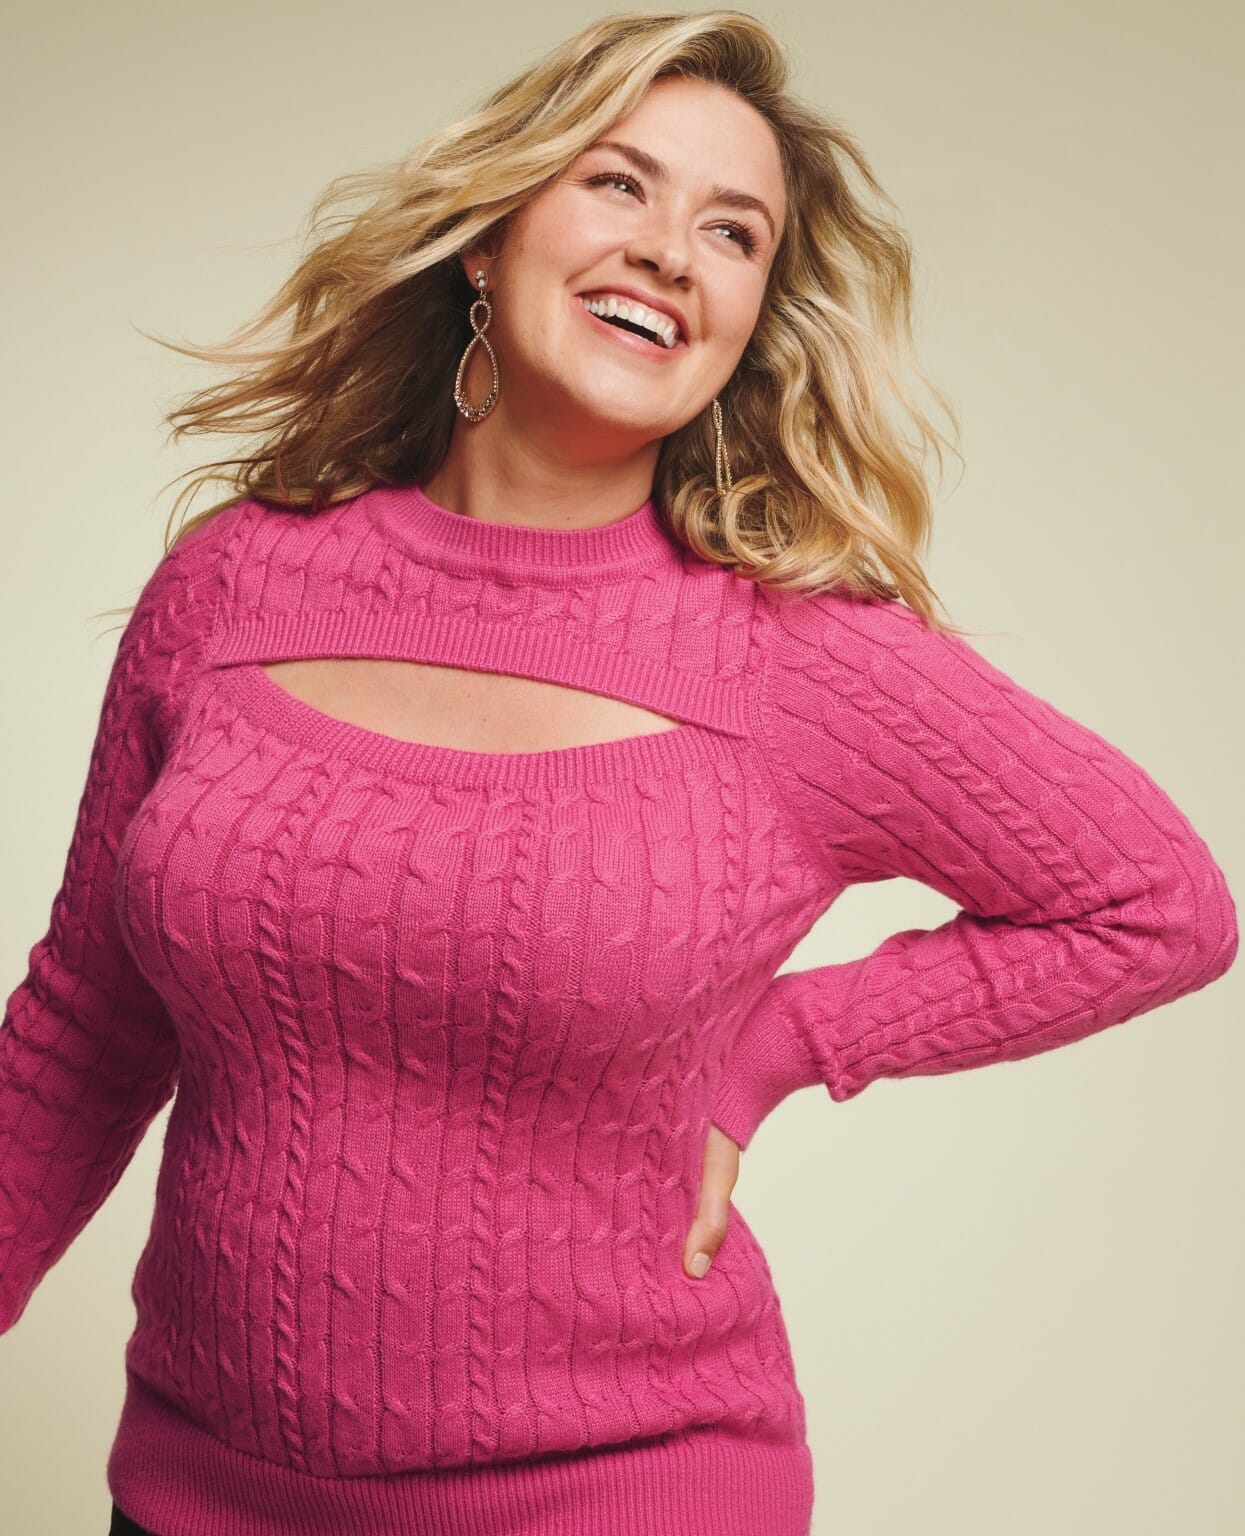 plus size model wearing a pink sweater with earrings.